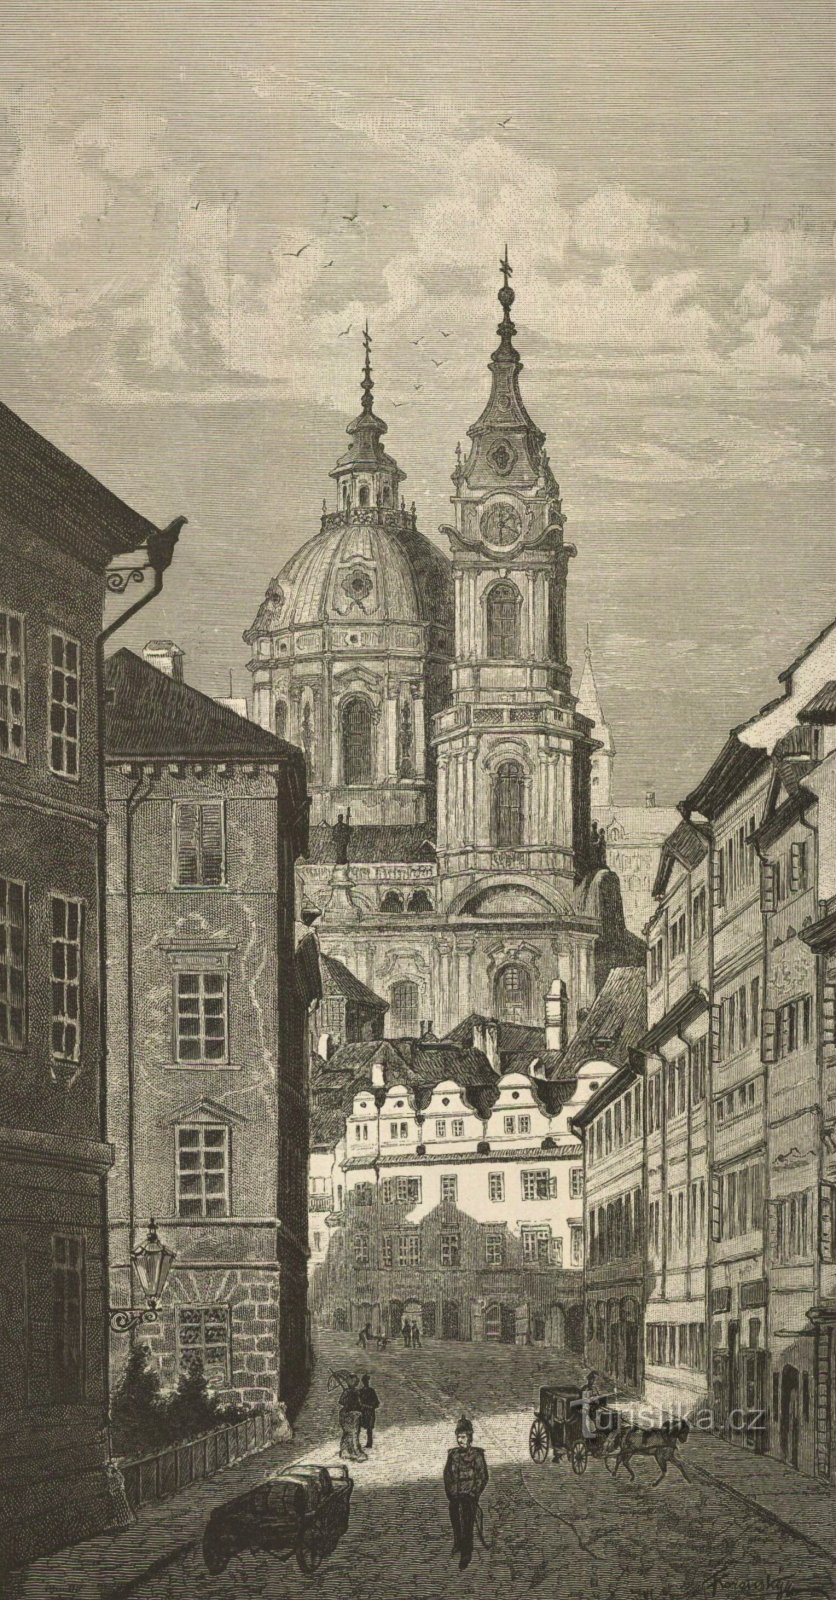 Karmelitská Street in the background with the Church of St. Nicholas in Prague in the second half of the 2th century